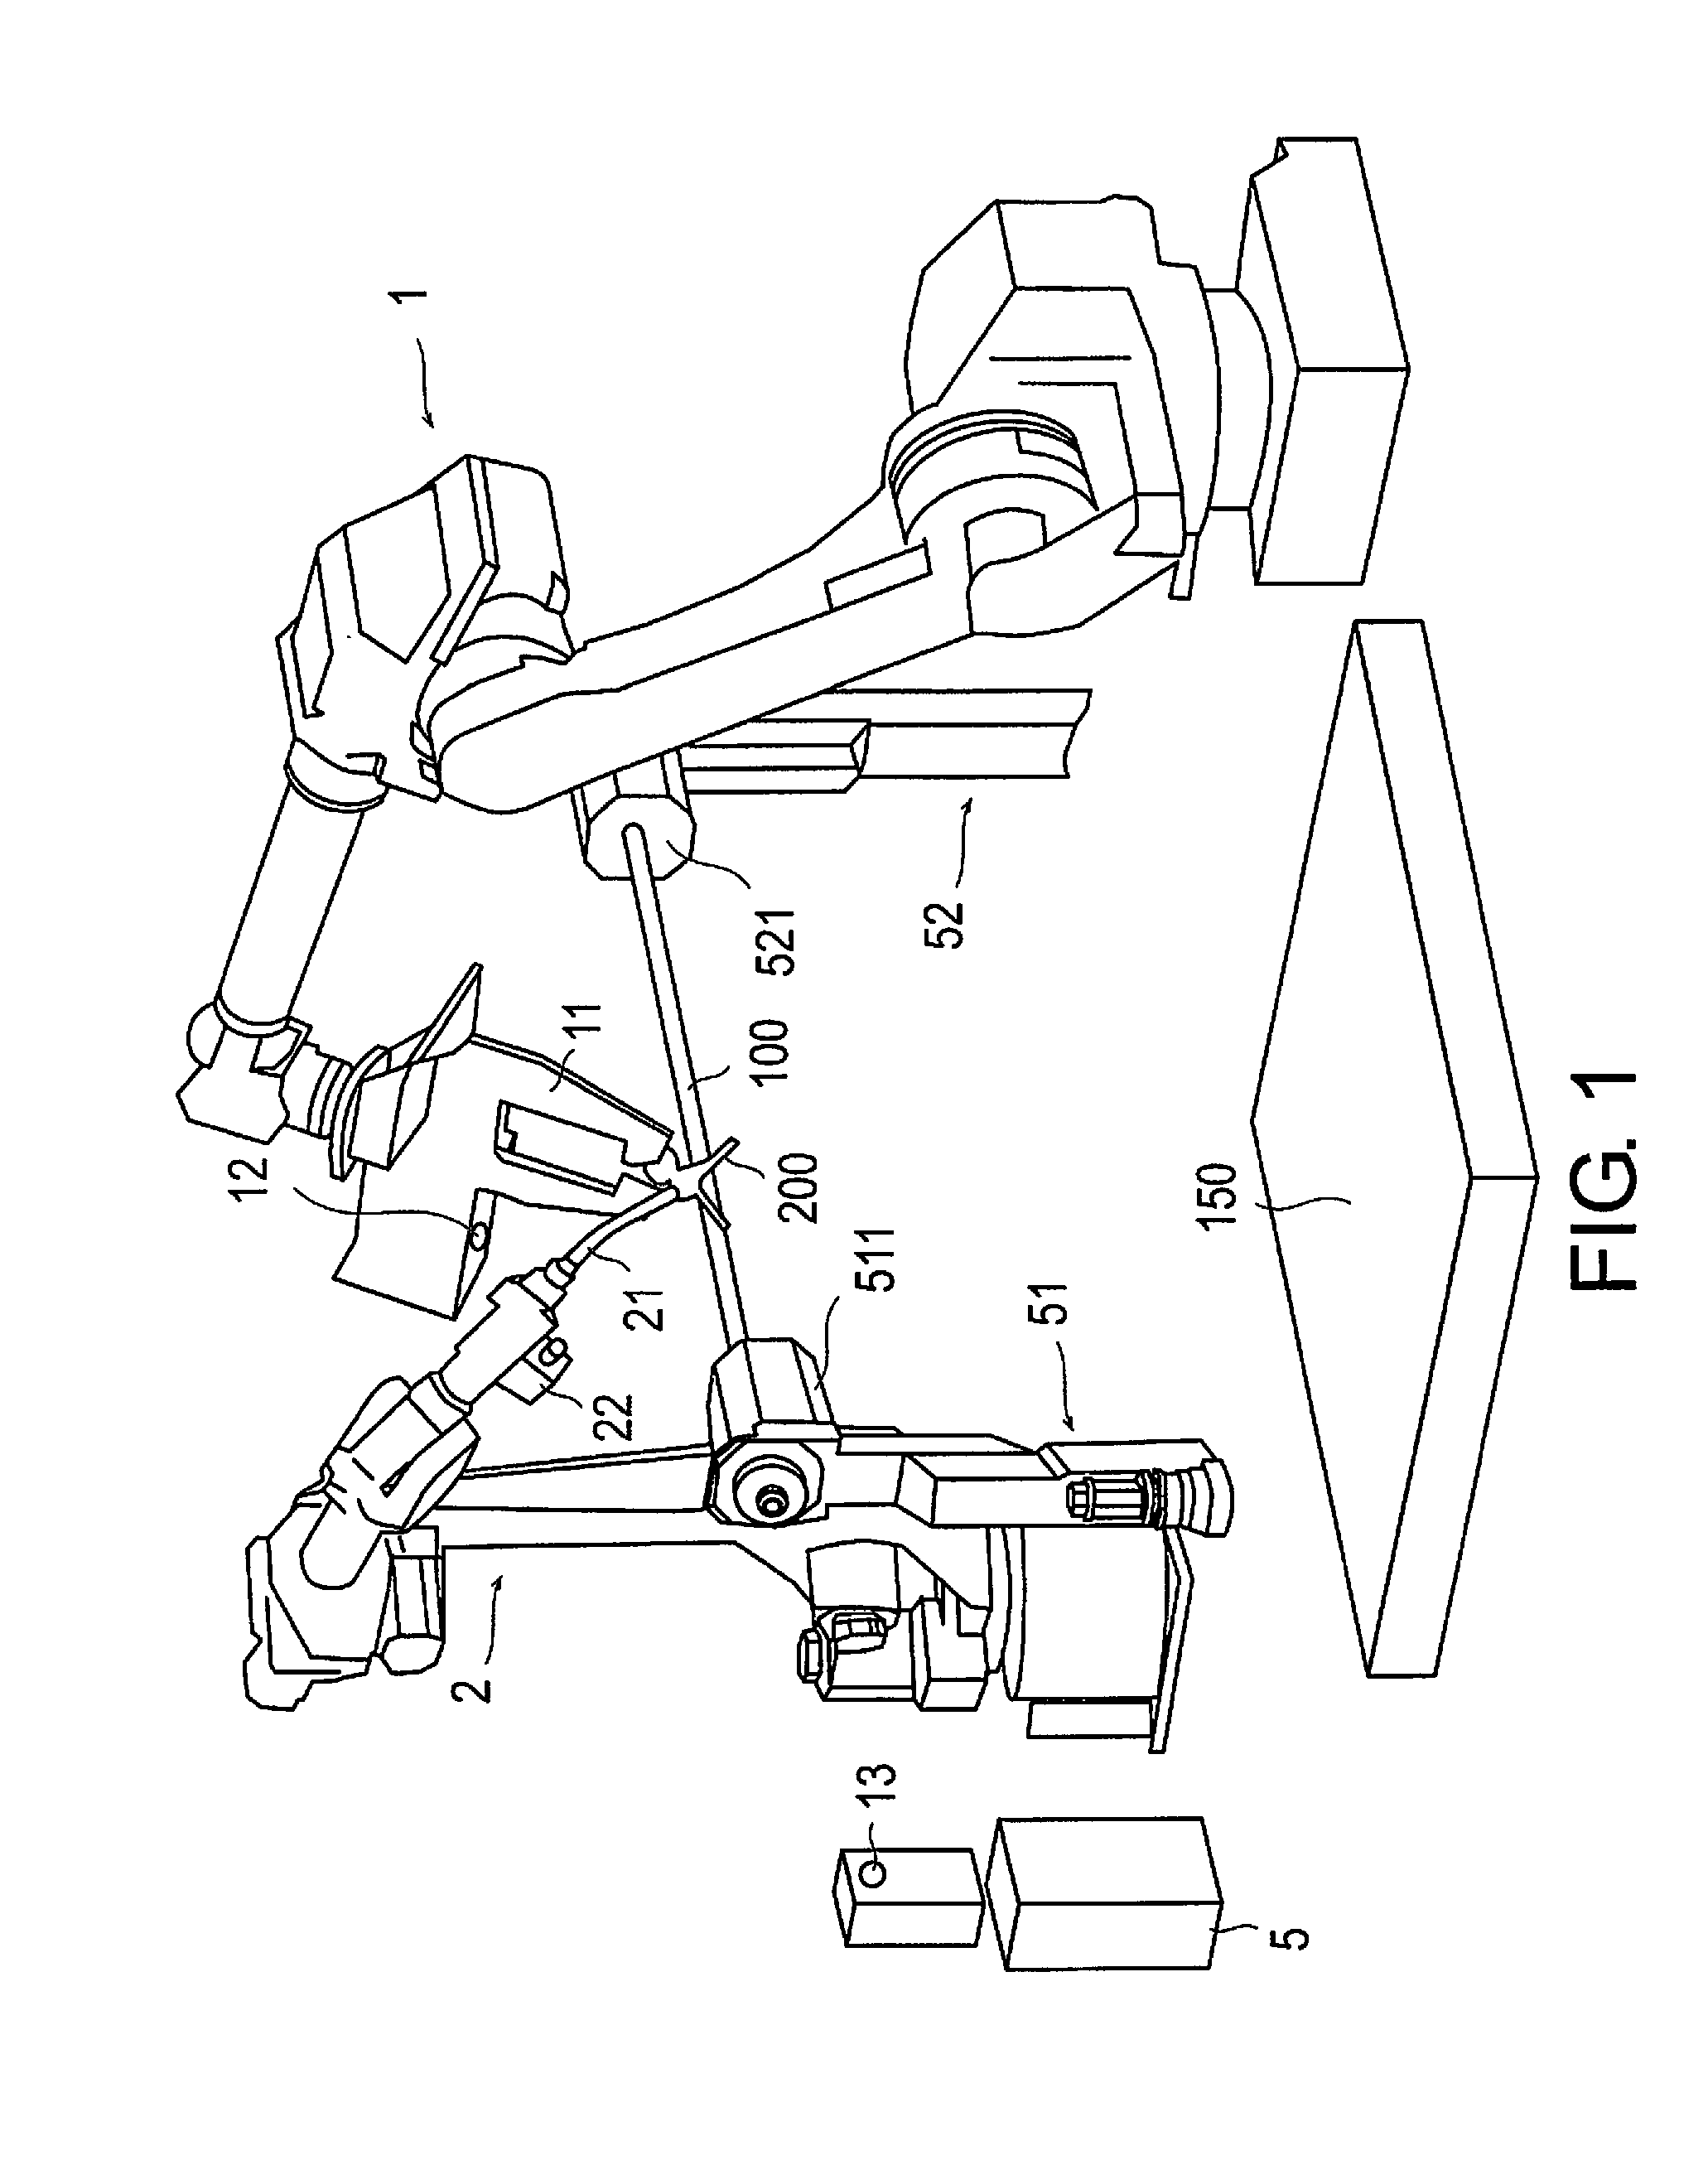 Manufacturing method and manufacturing device for manufacturing a joined piece